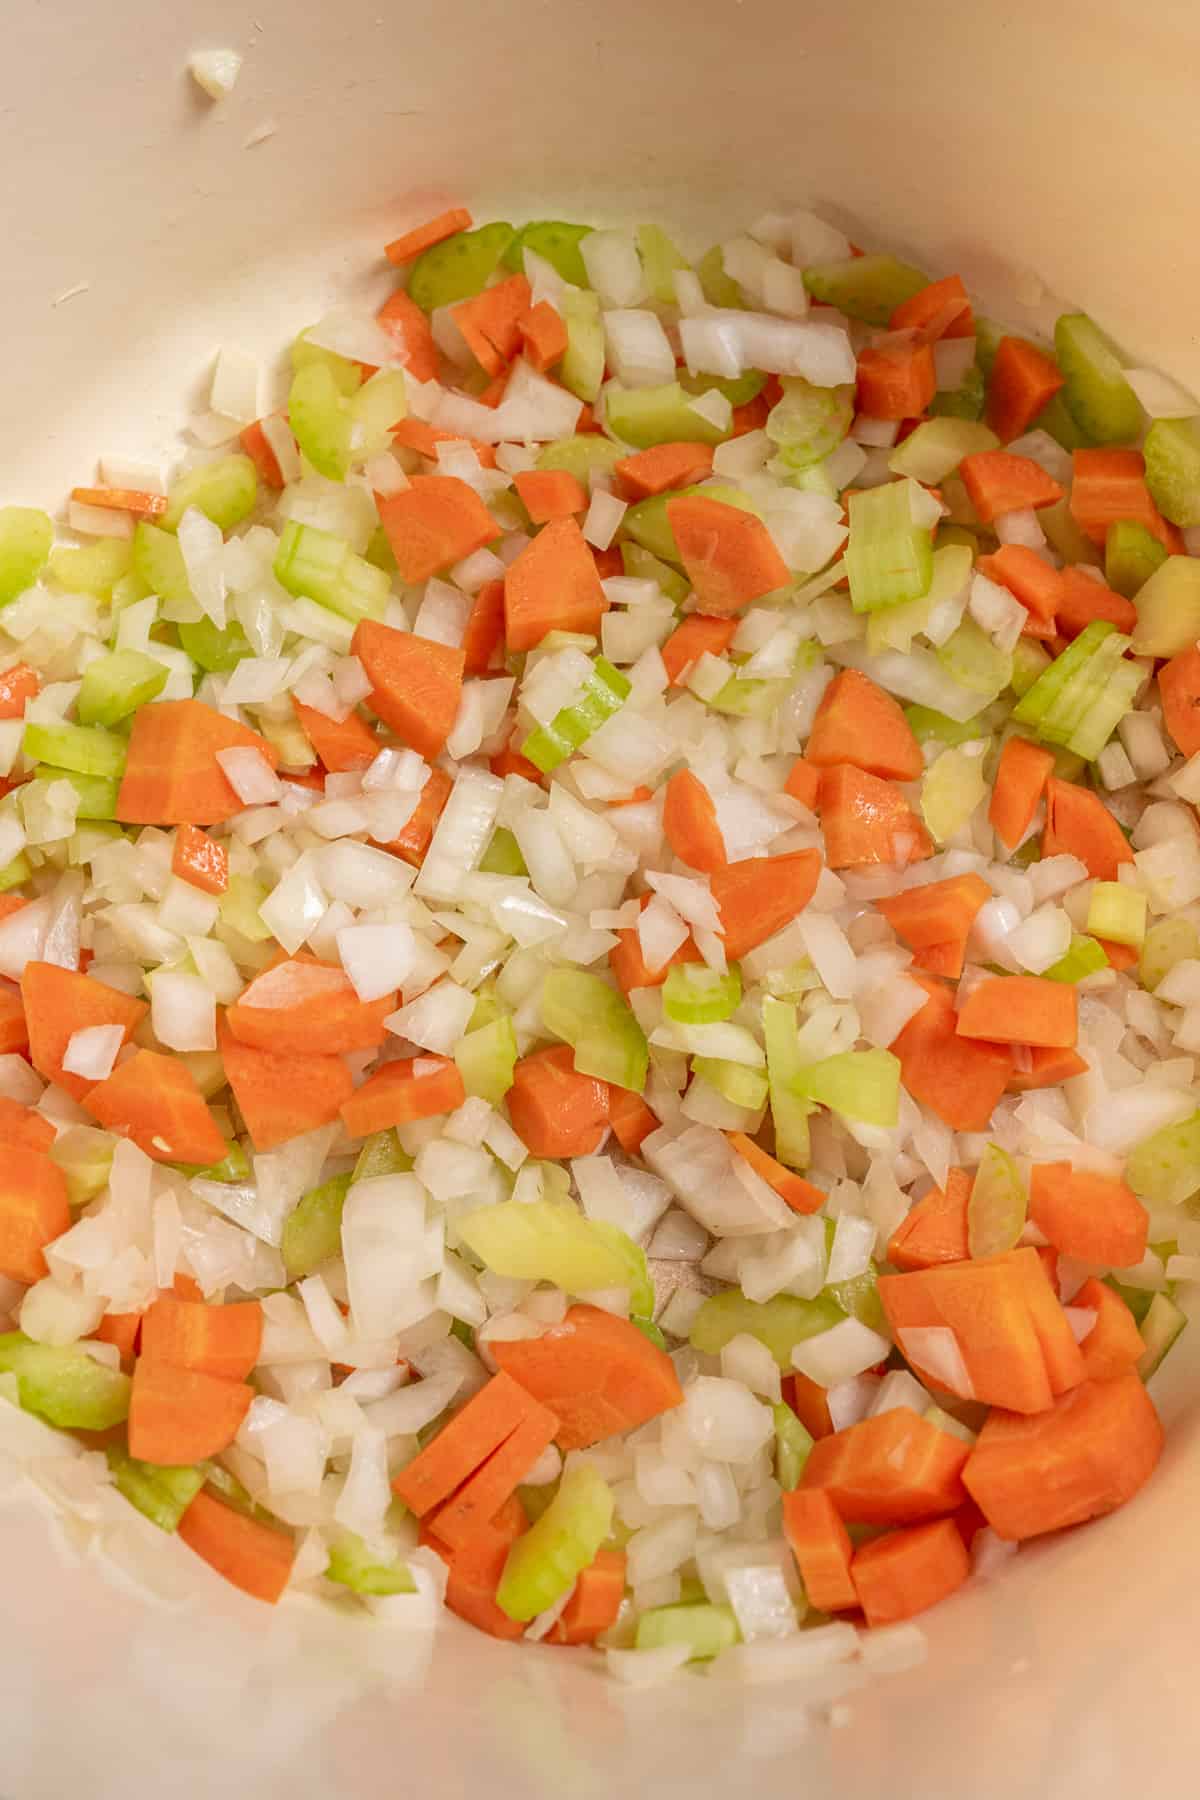 onion, garlic, celery and carrots being sauteed.